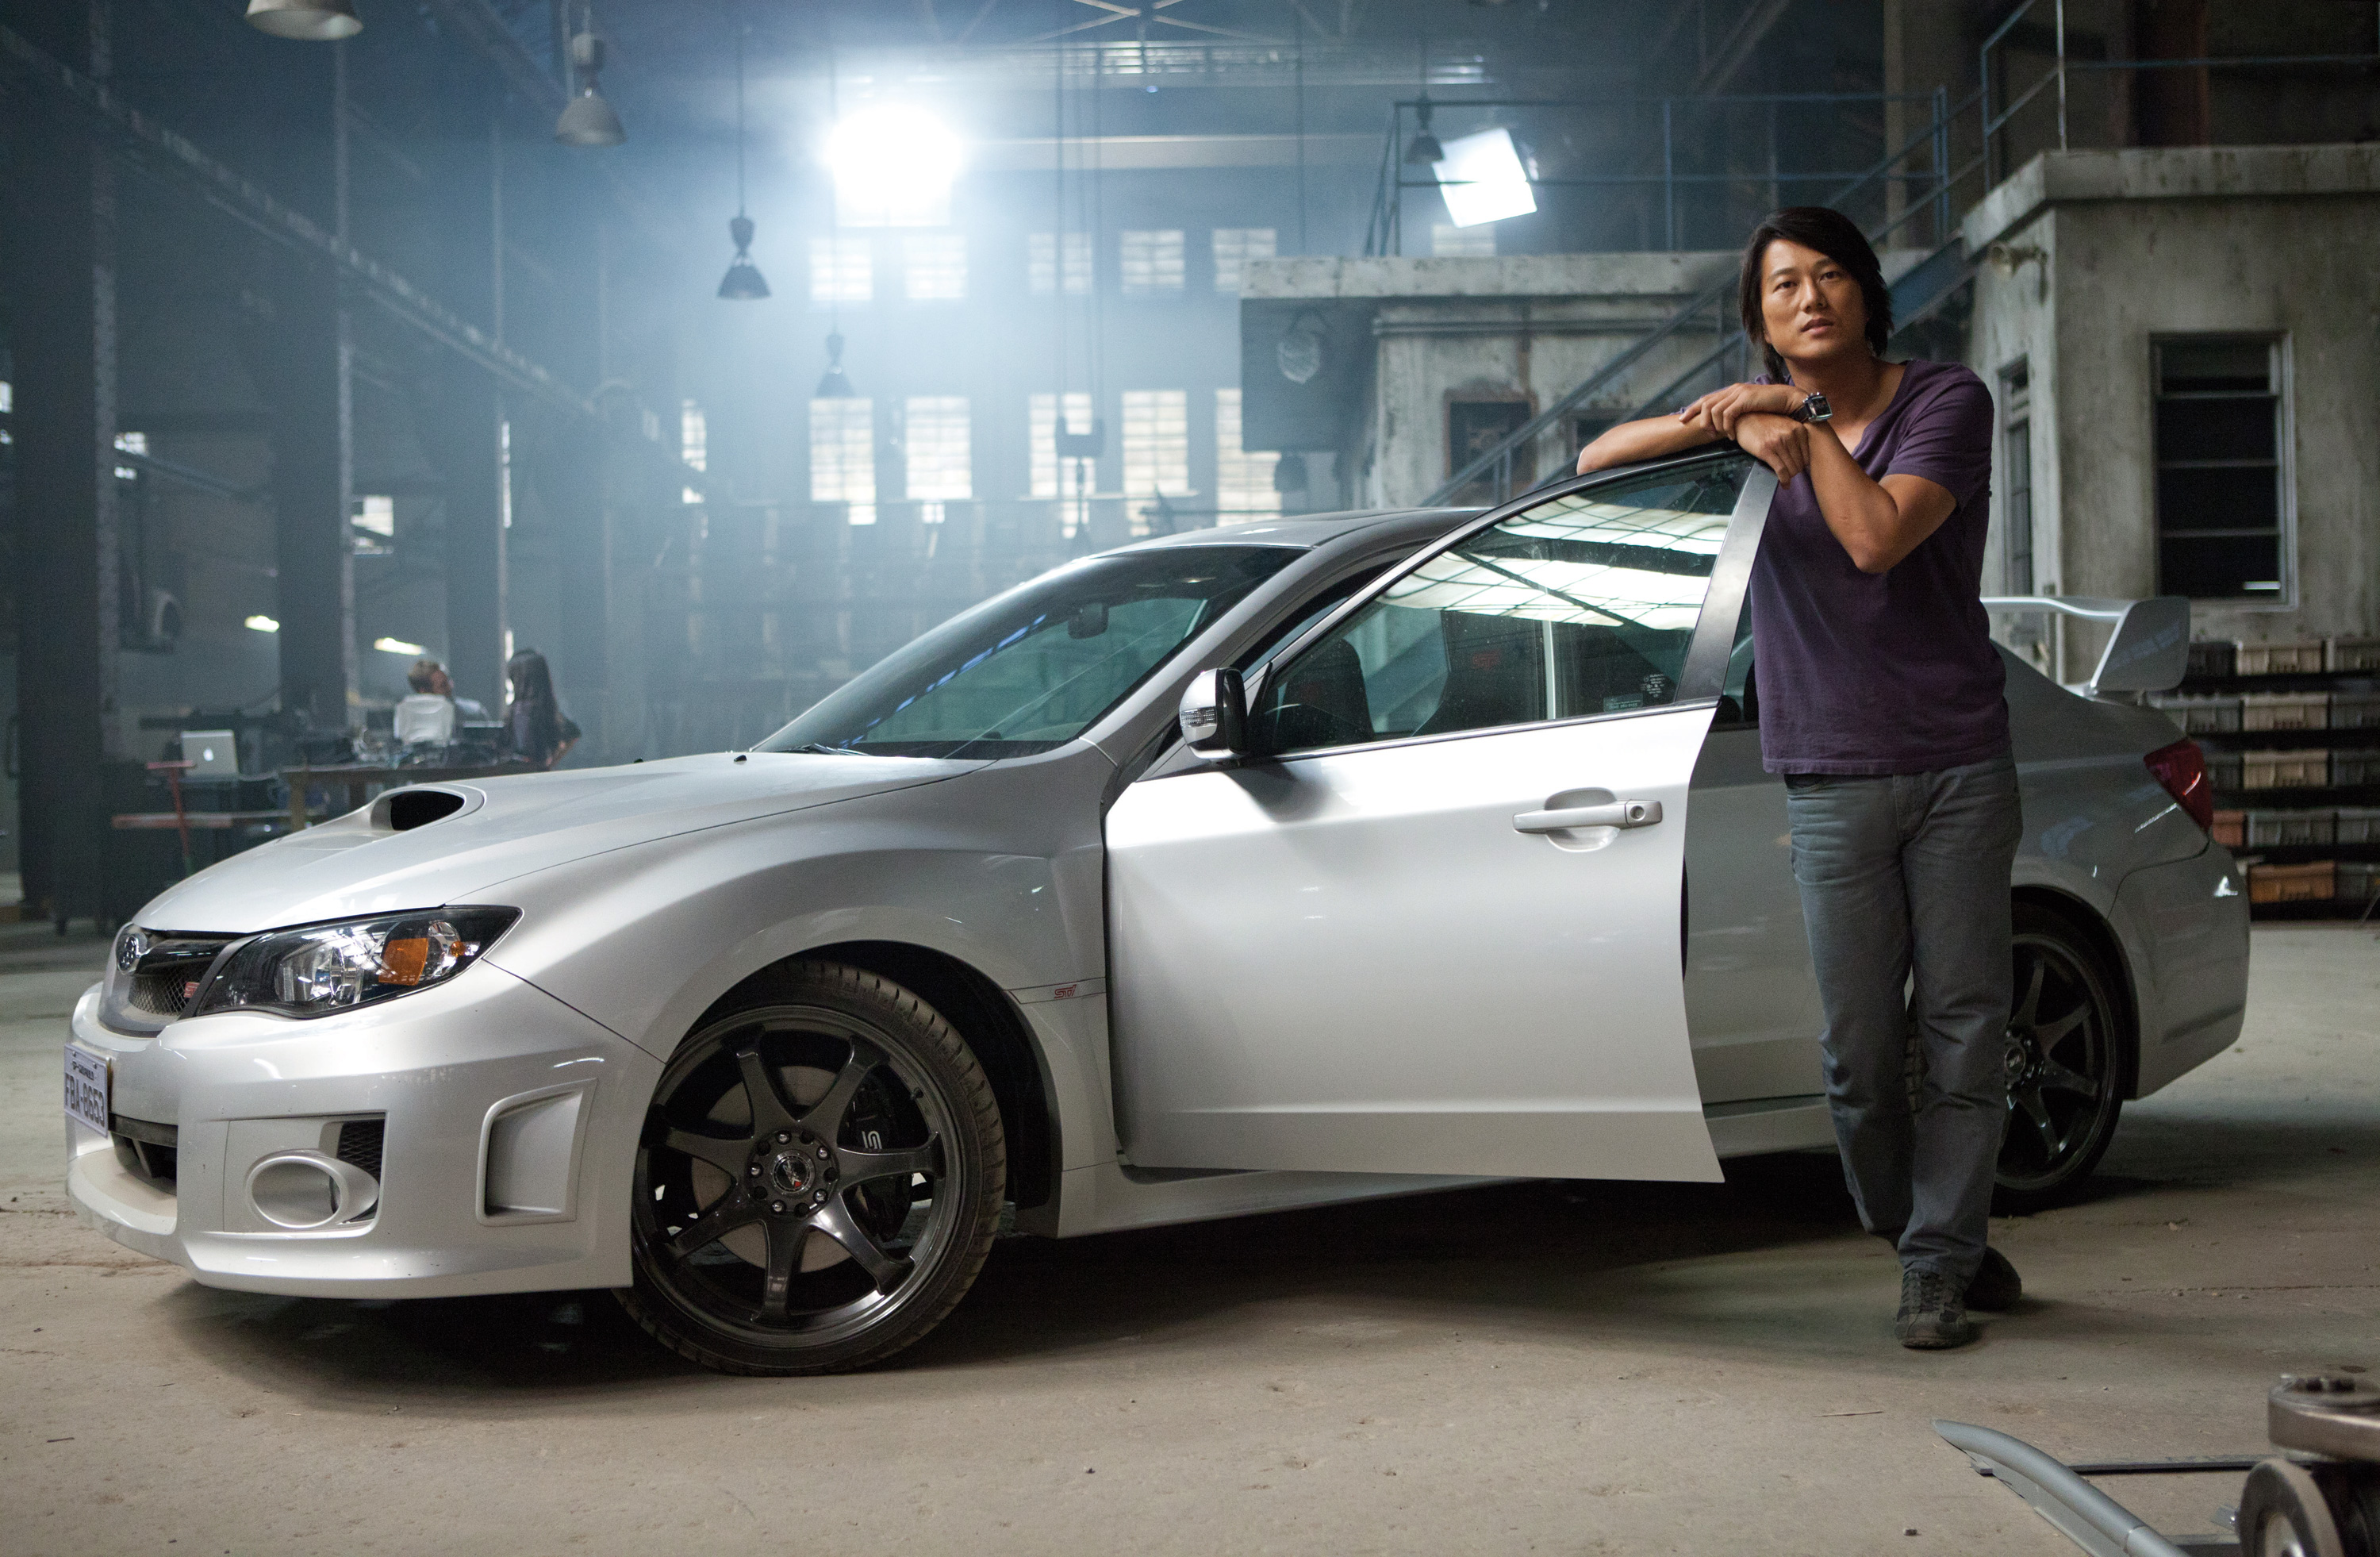 FAST FIVE Movie Images FAST AND THE FURIOUS 5 Images | Collider